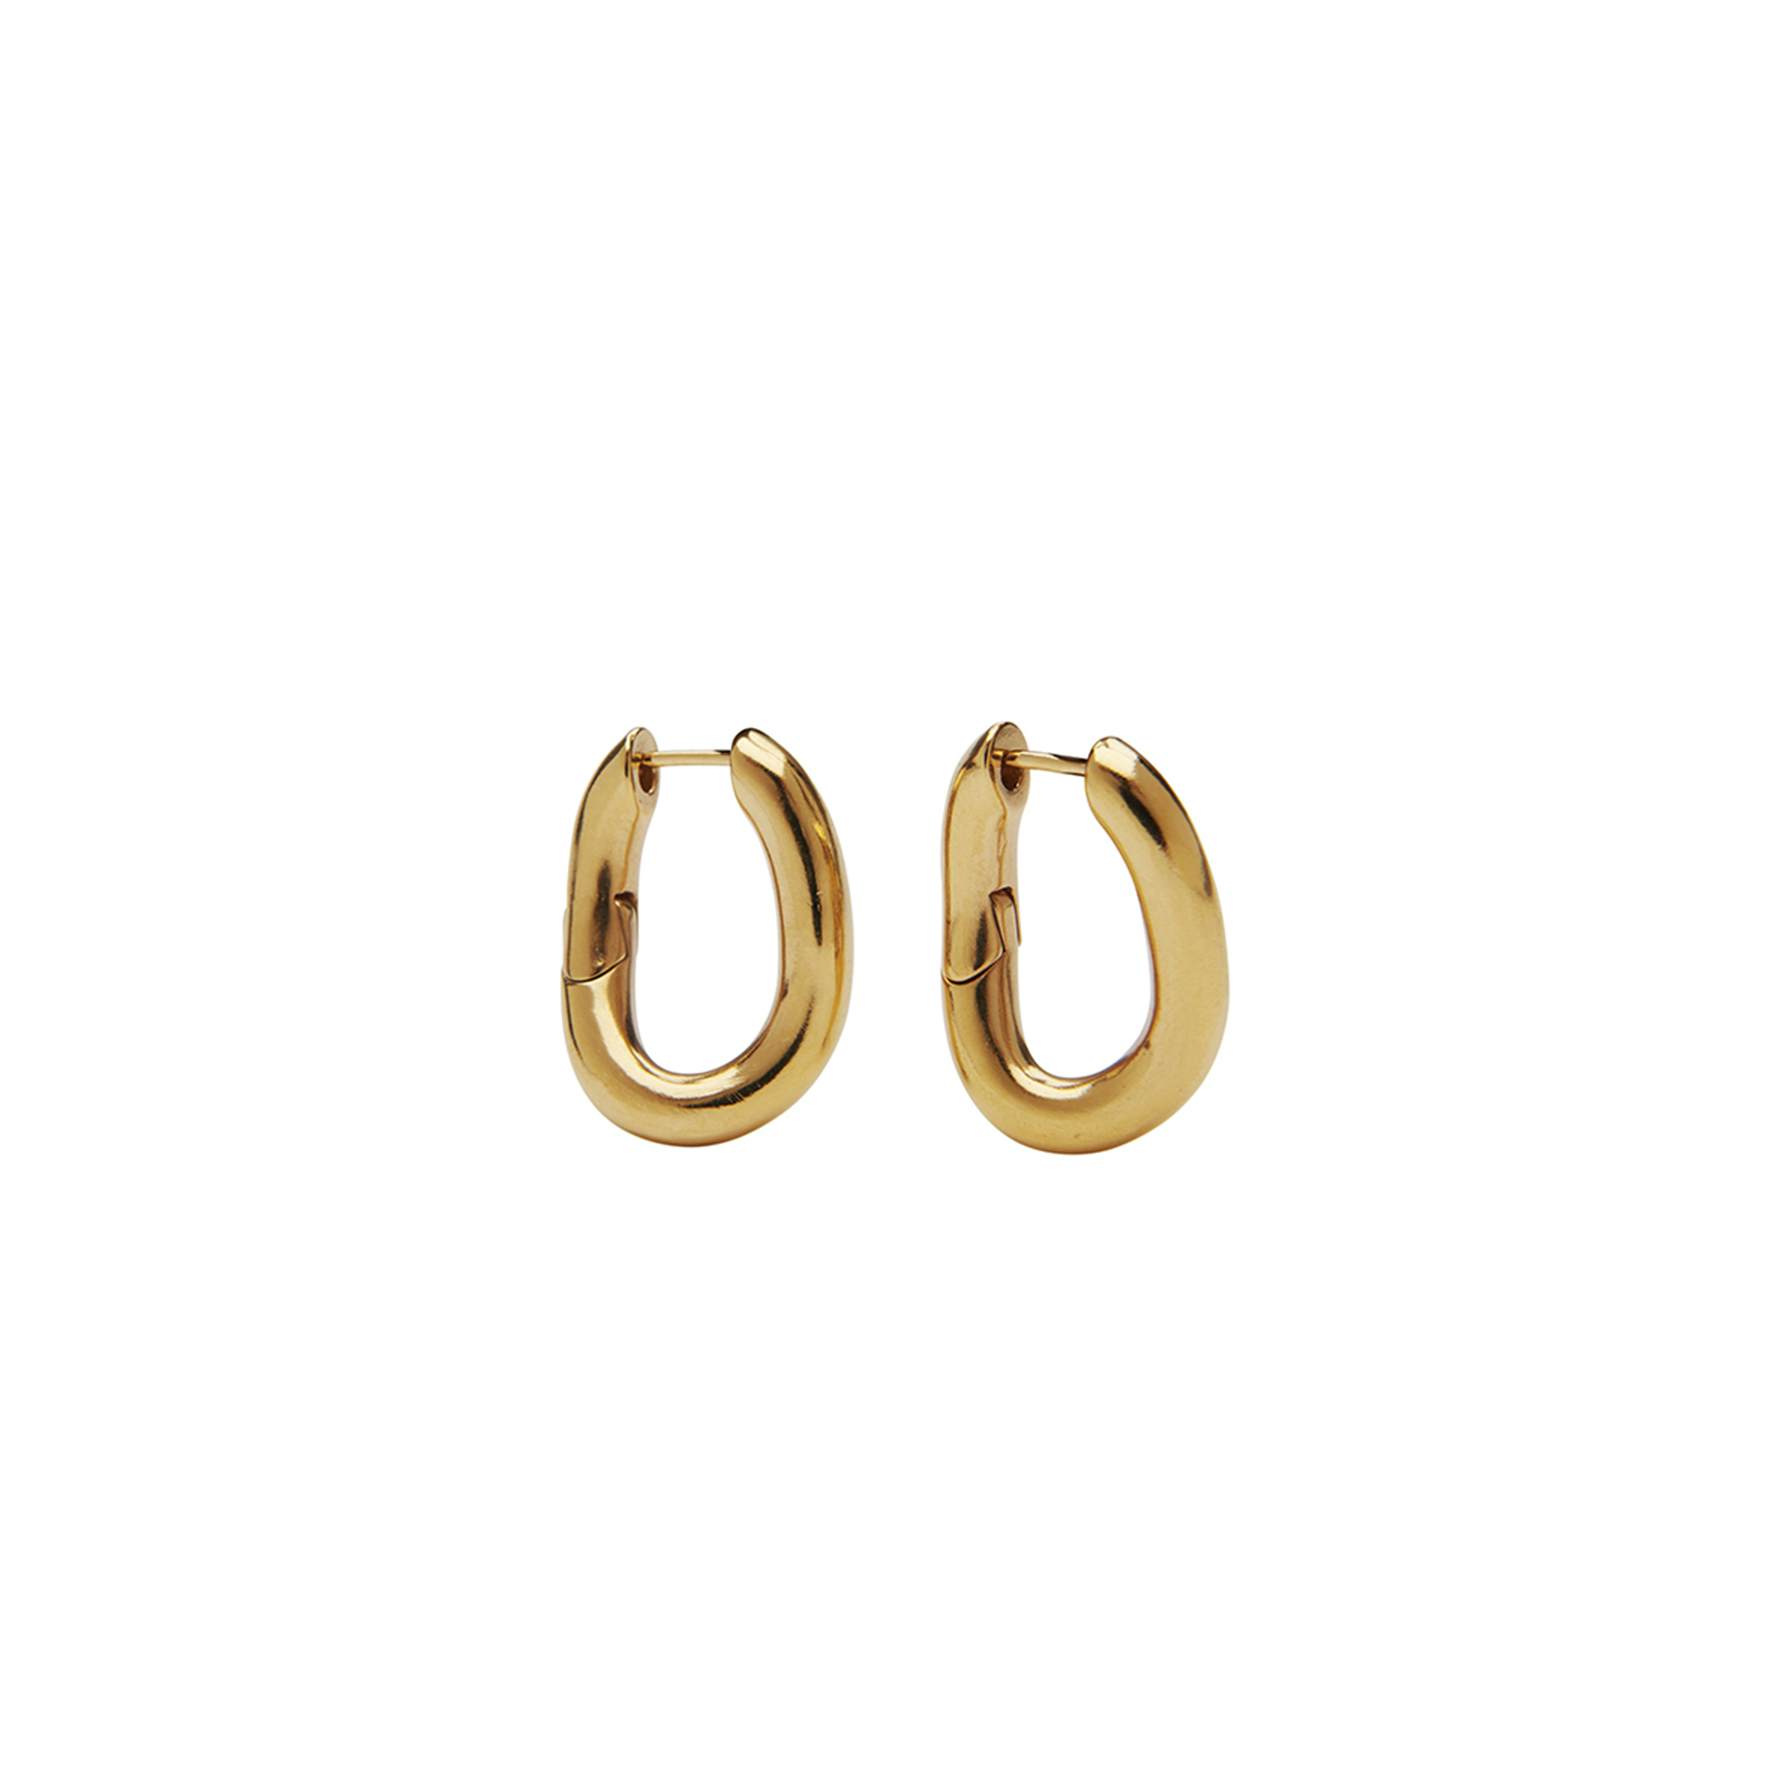 Maxie Hoops from Pico in Goldplated Brass